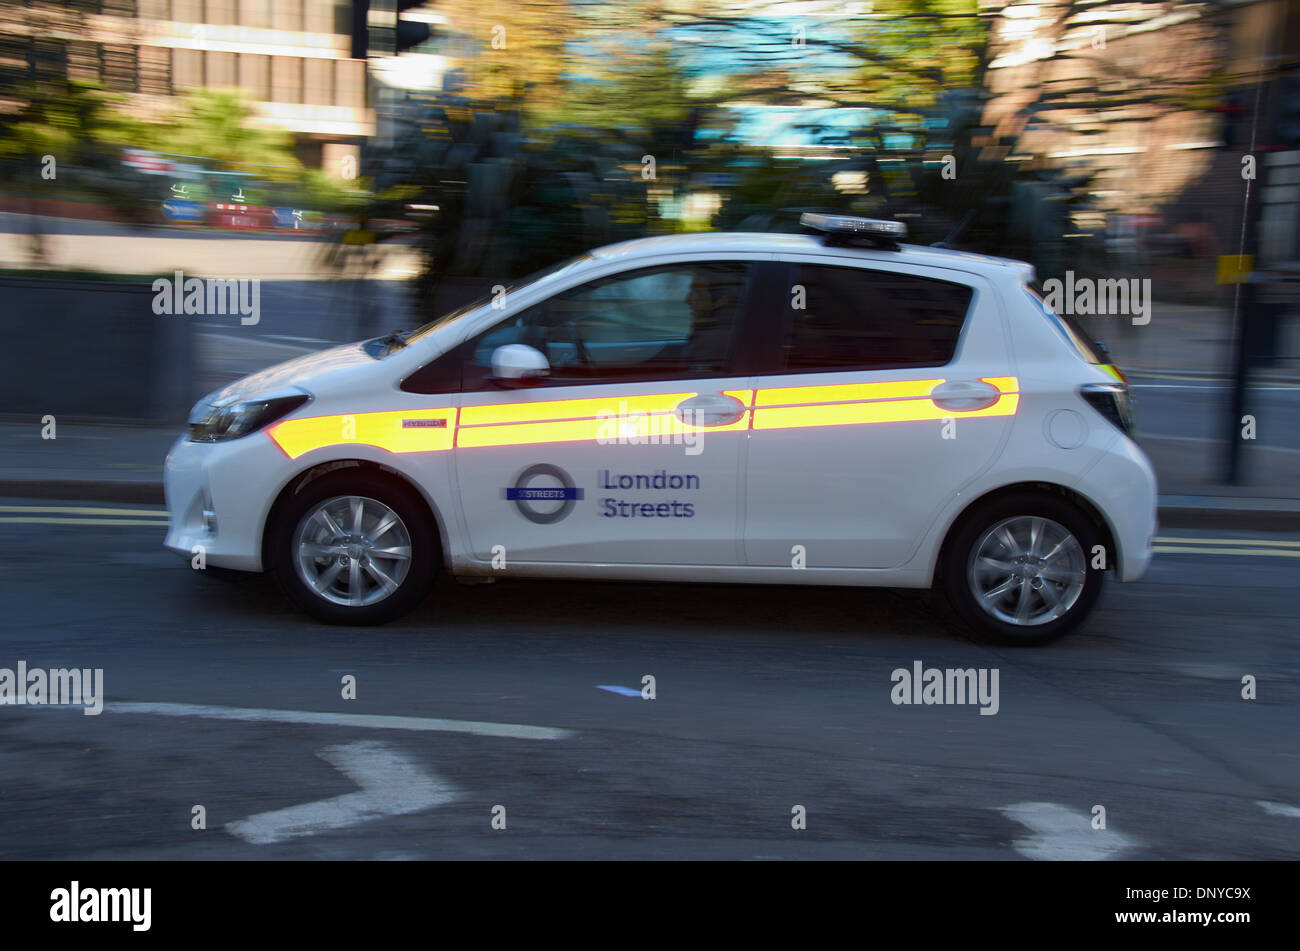 London Transport car in the city of London, England. Stock Photo